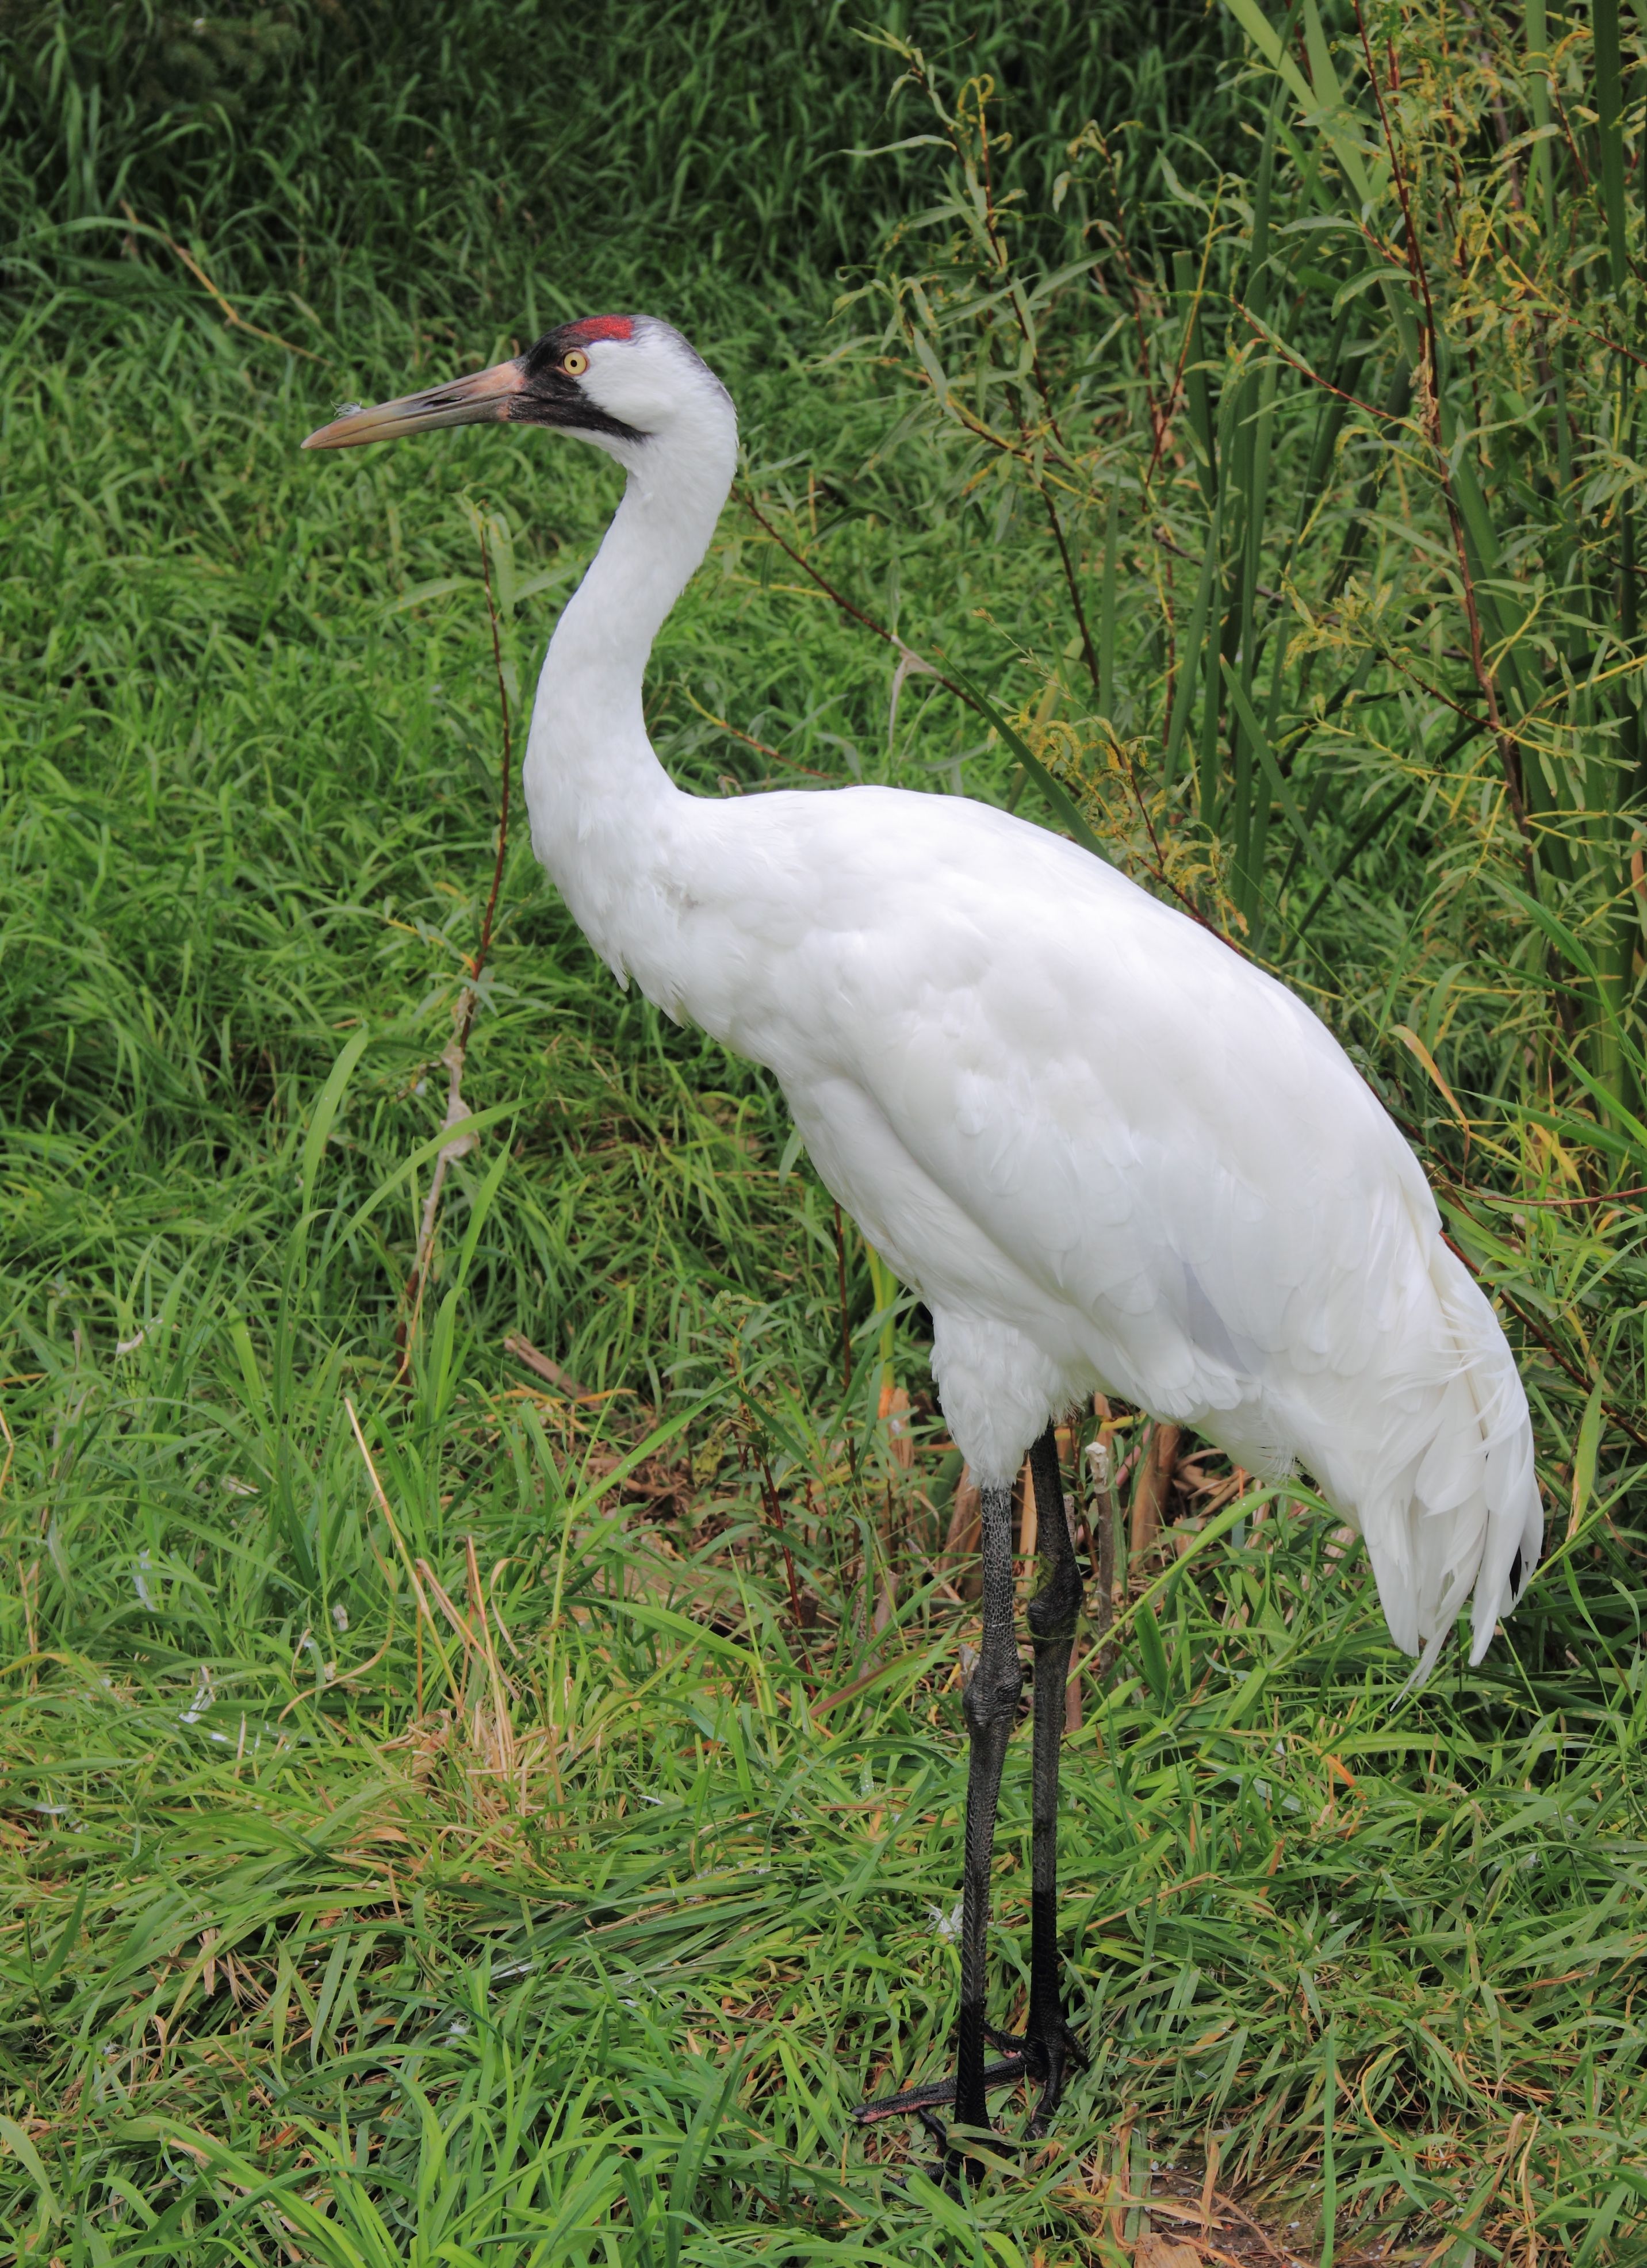 Whooping Crane photo and wallpaper. Collection of the Whooping Crane picture